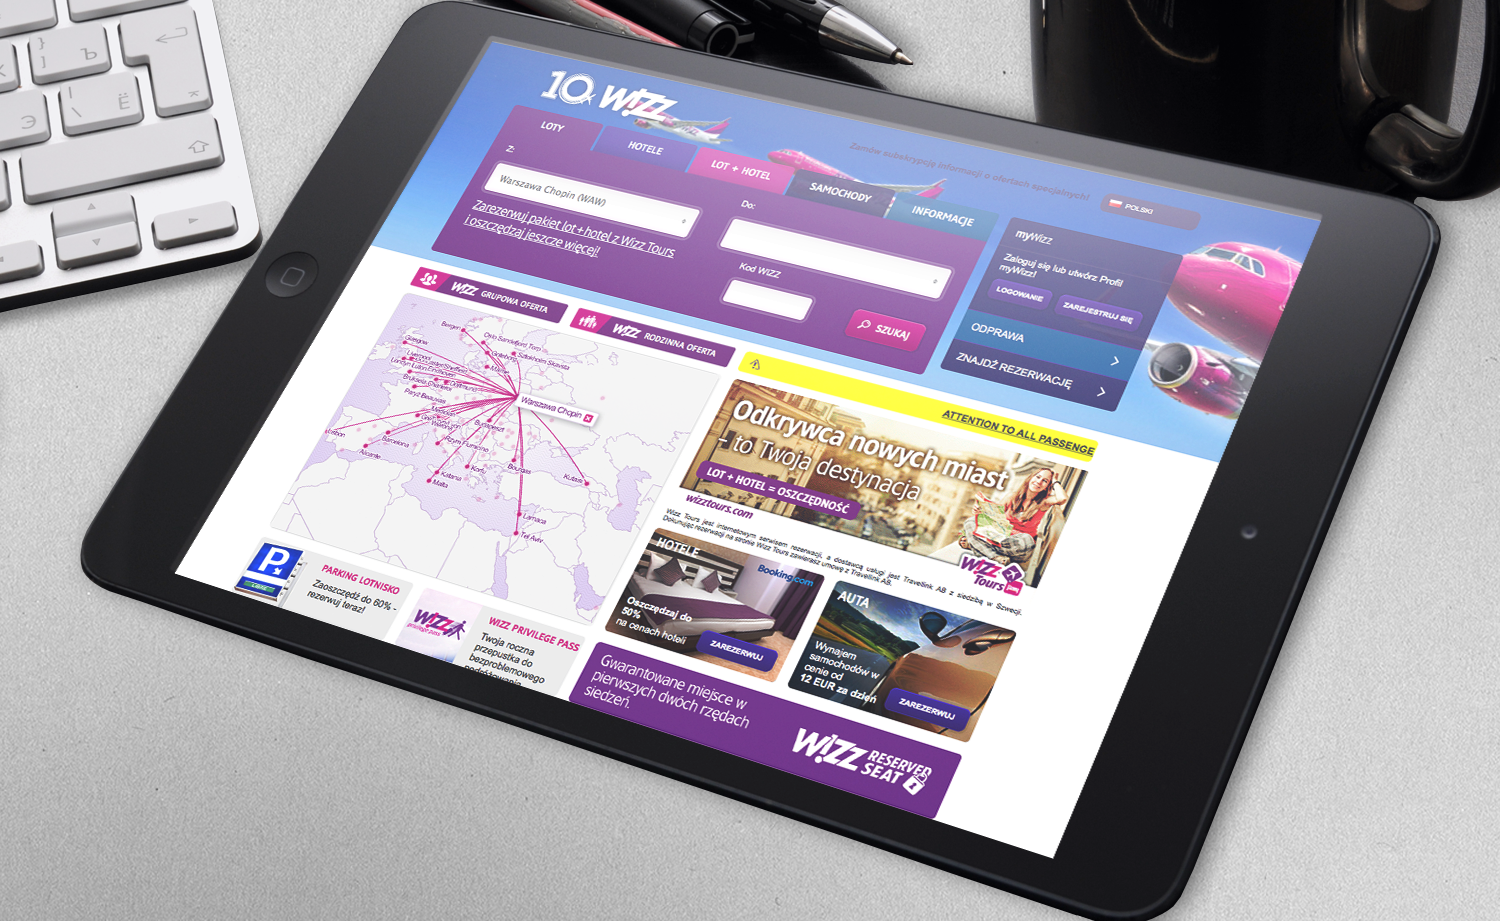 Wizzair has a new website – users will not get lost